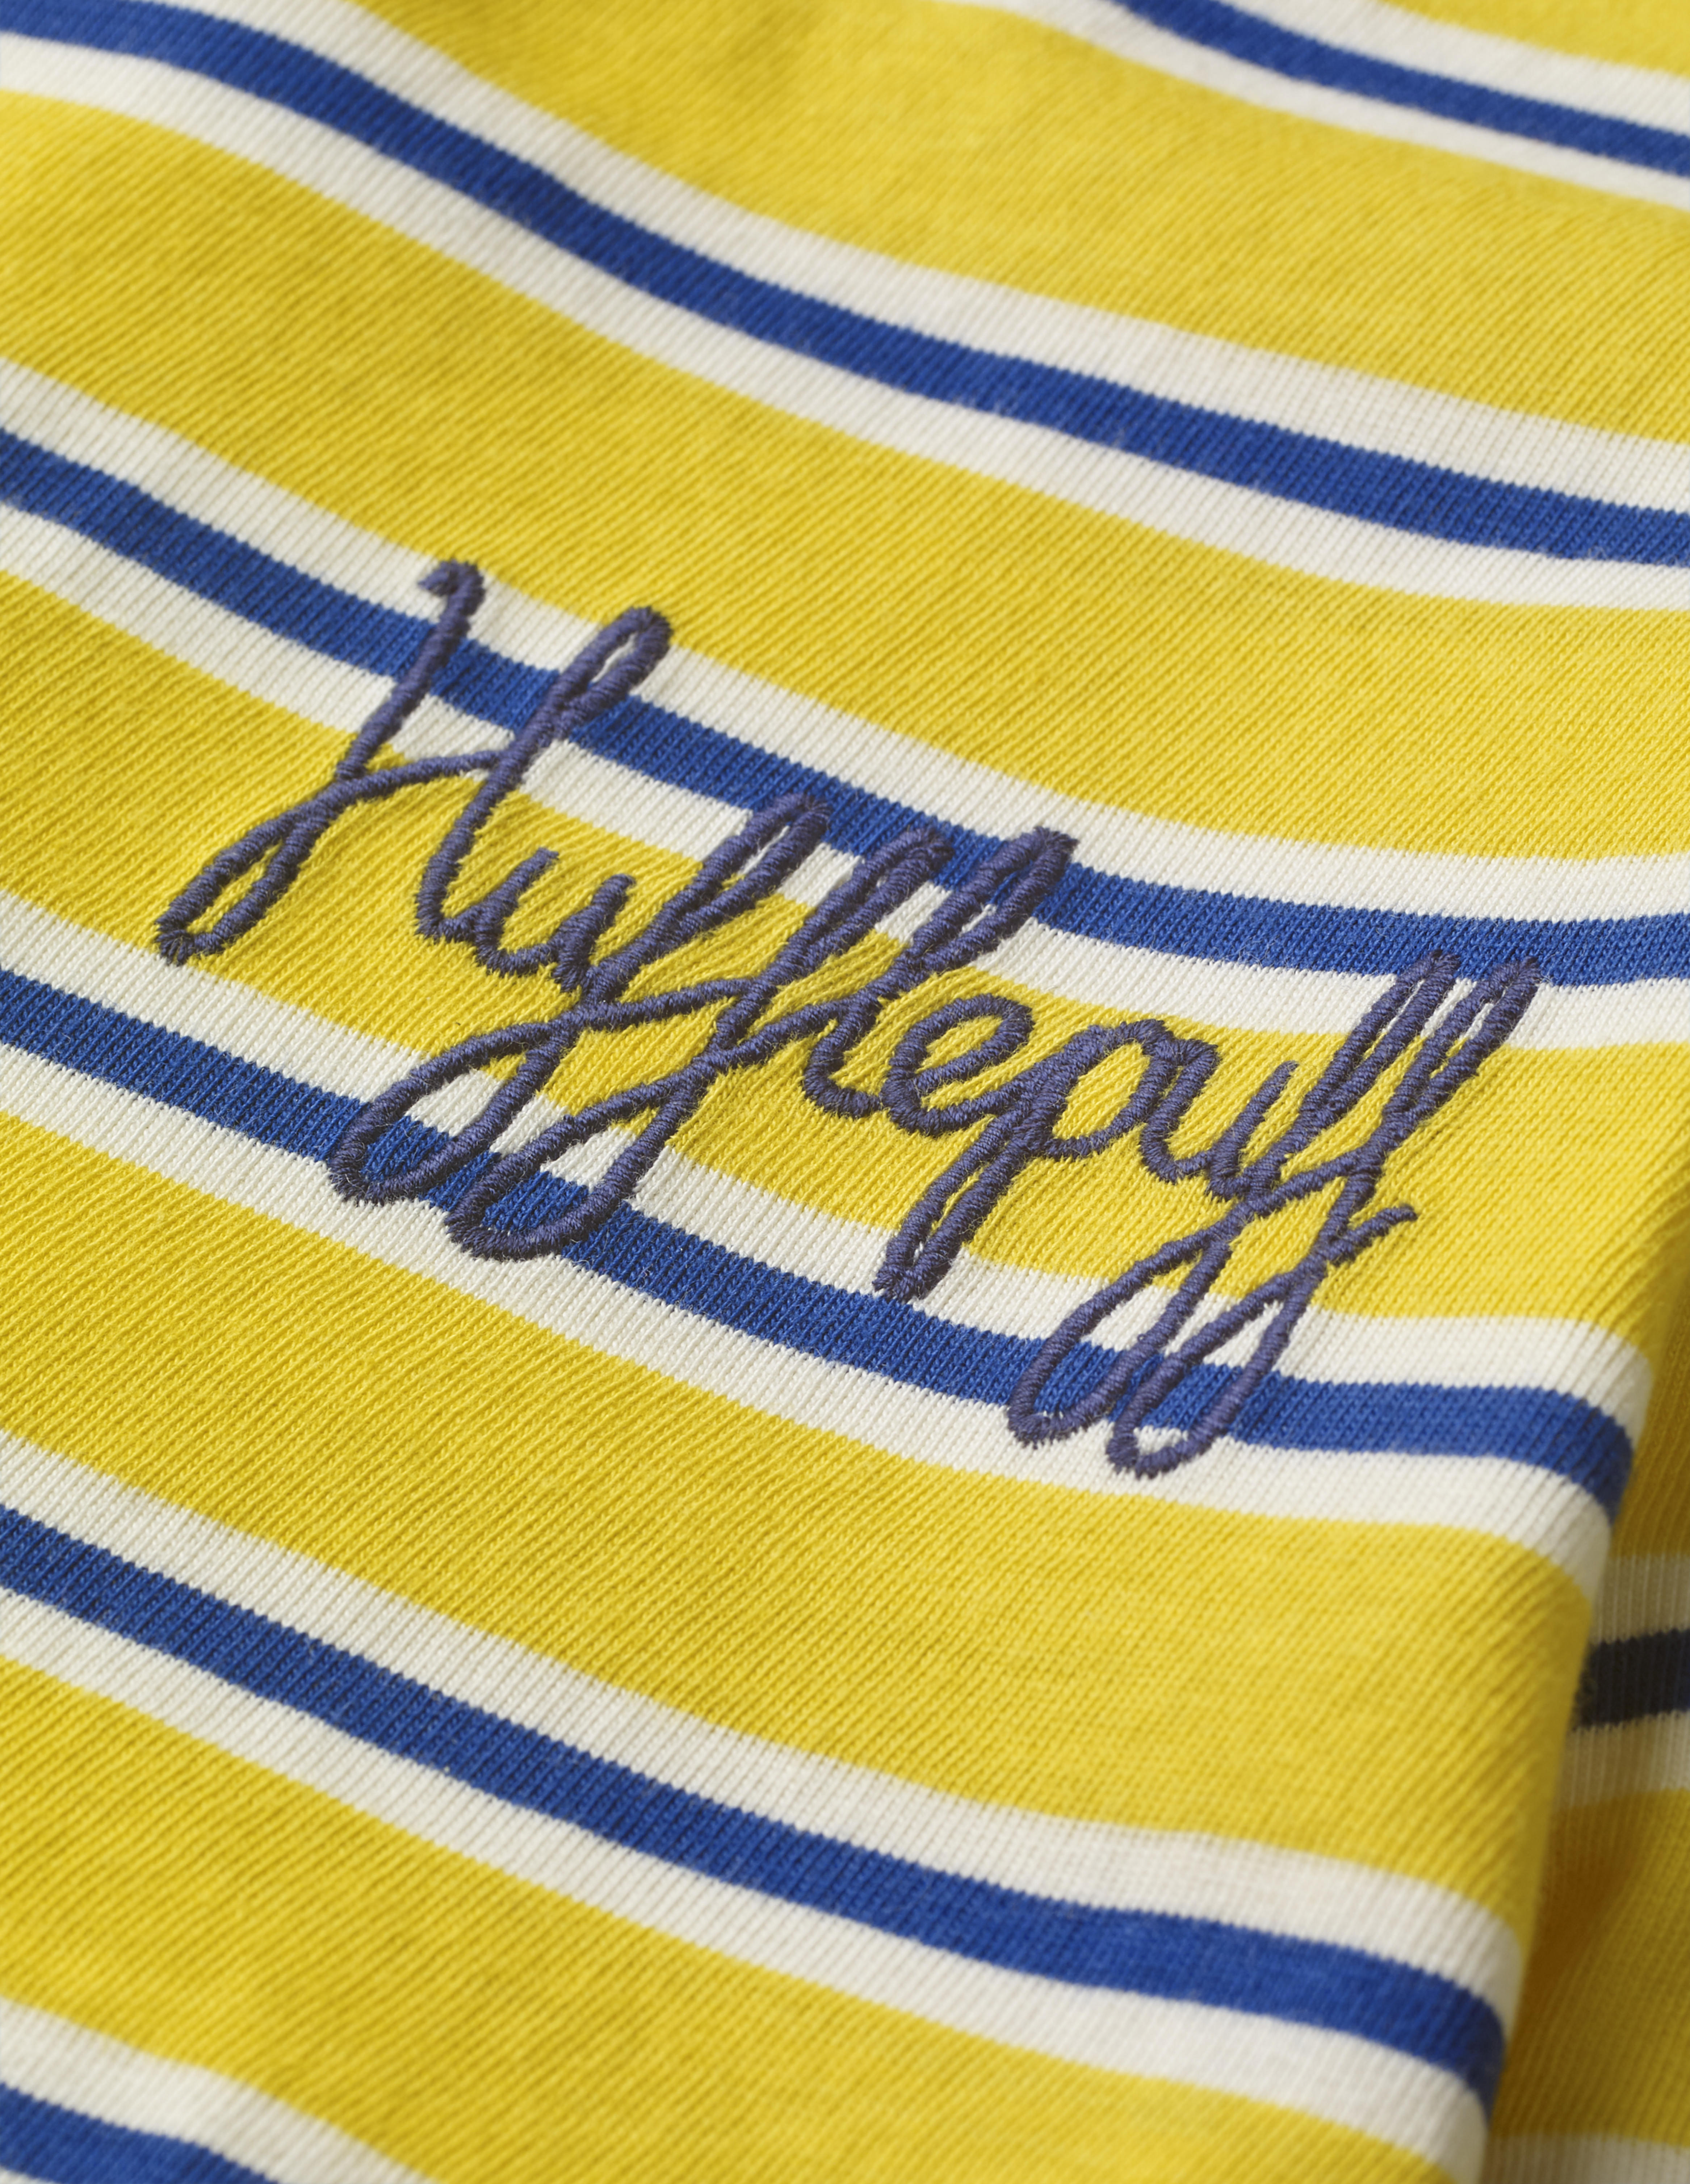 This close-up of the Mini Boden House Breton in yellow better shows the word “Hufflepuff” written in navy blue script in the front pocket area. It retails between £20 and £22.